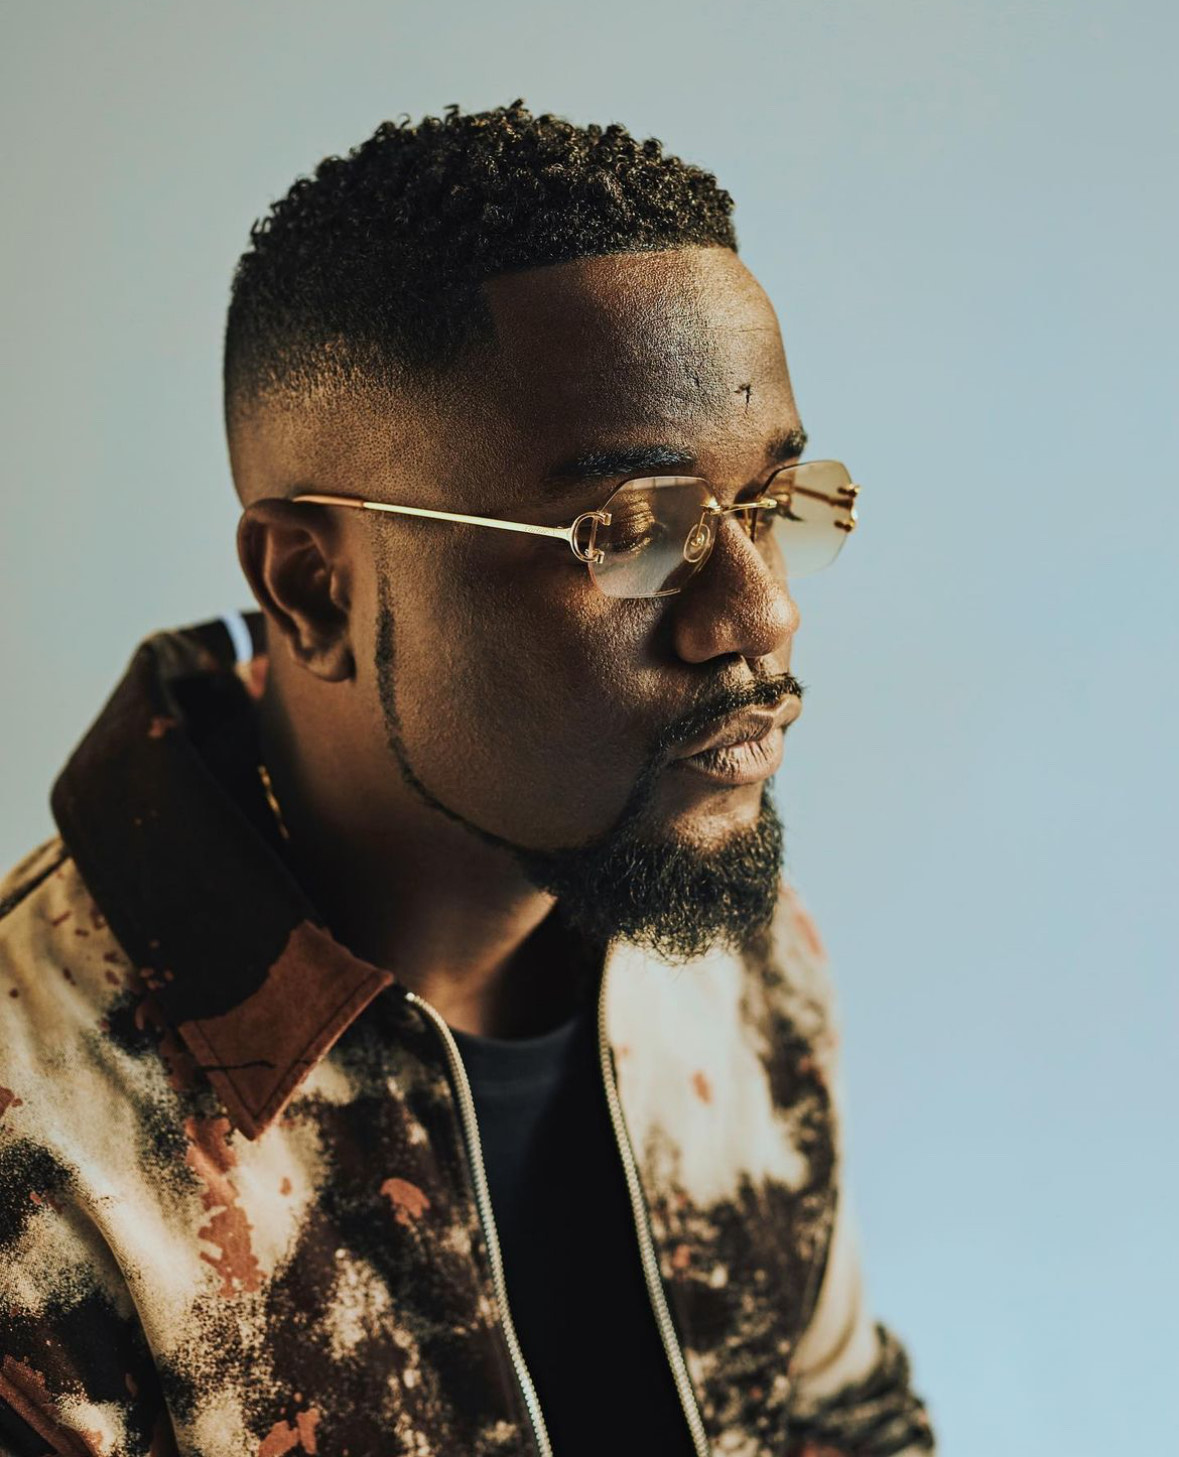 "He's got potential" - Sarkodie reacts to Dremo's dissing track